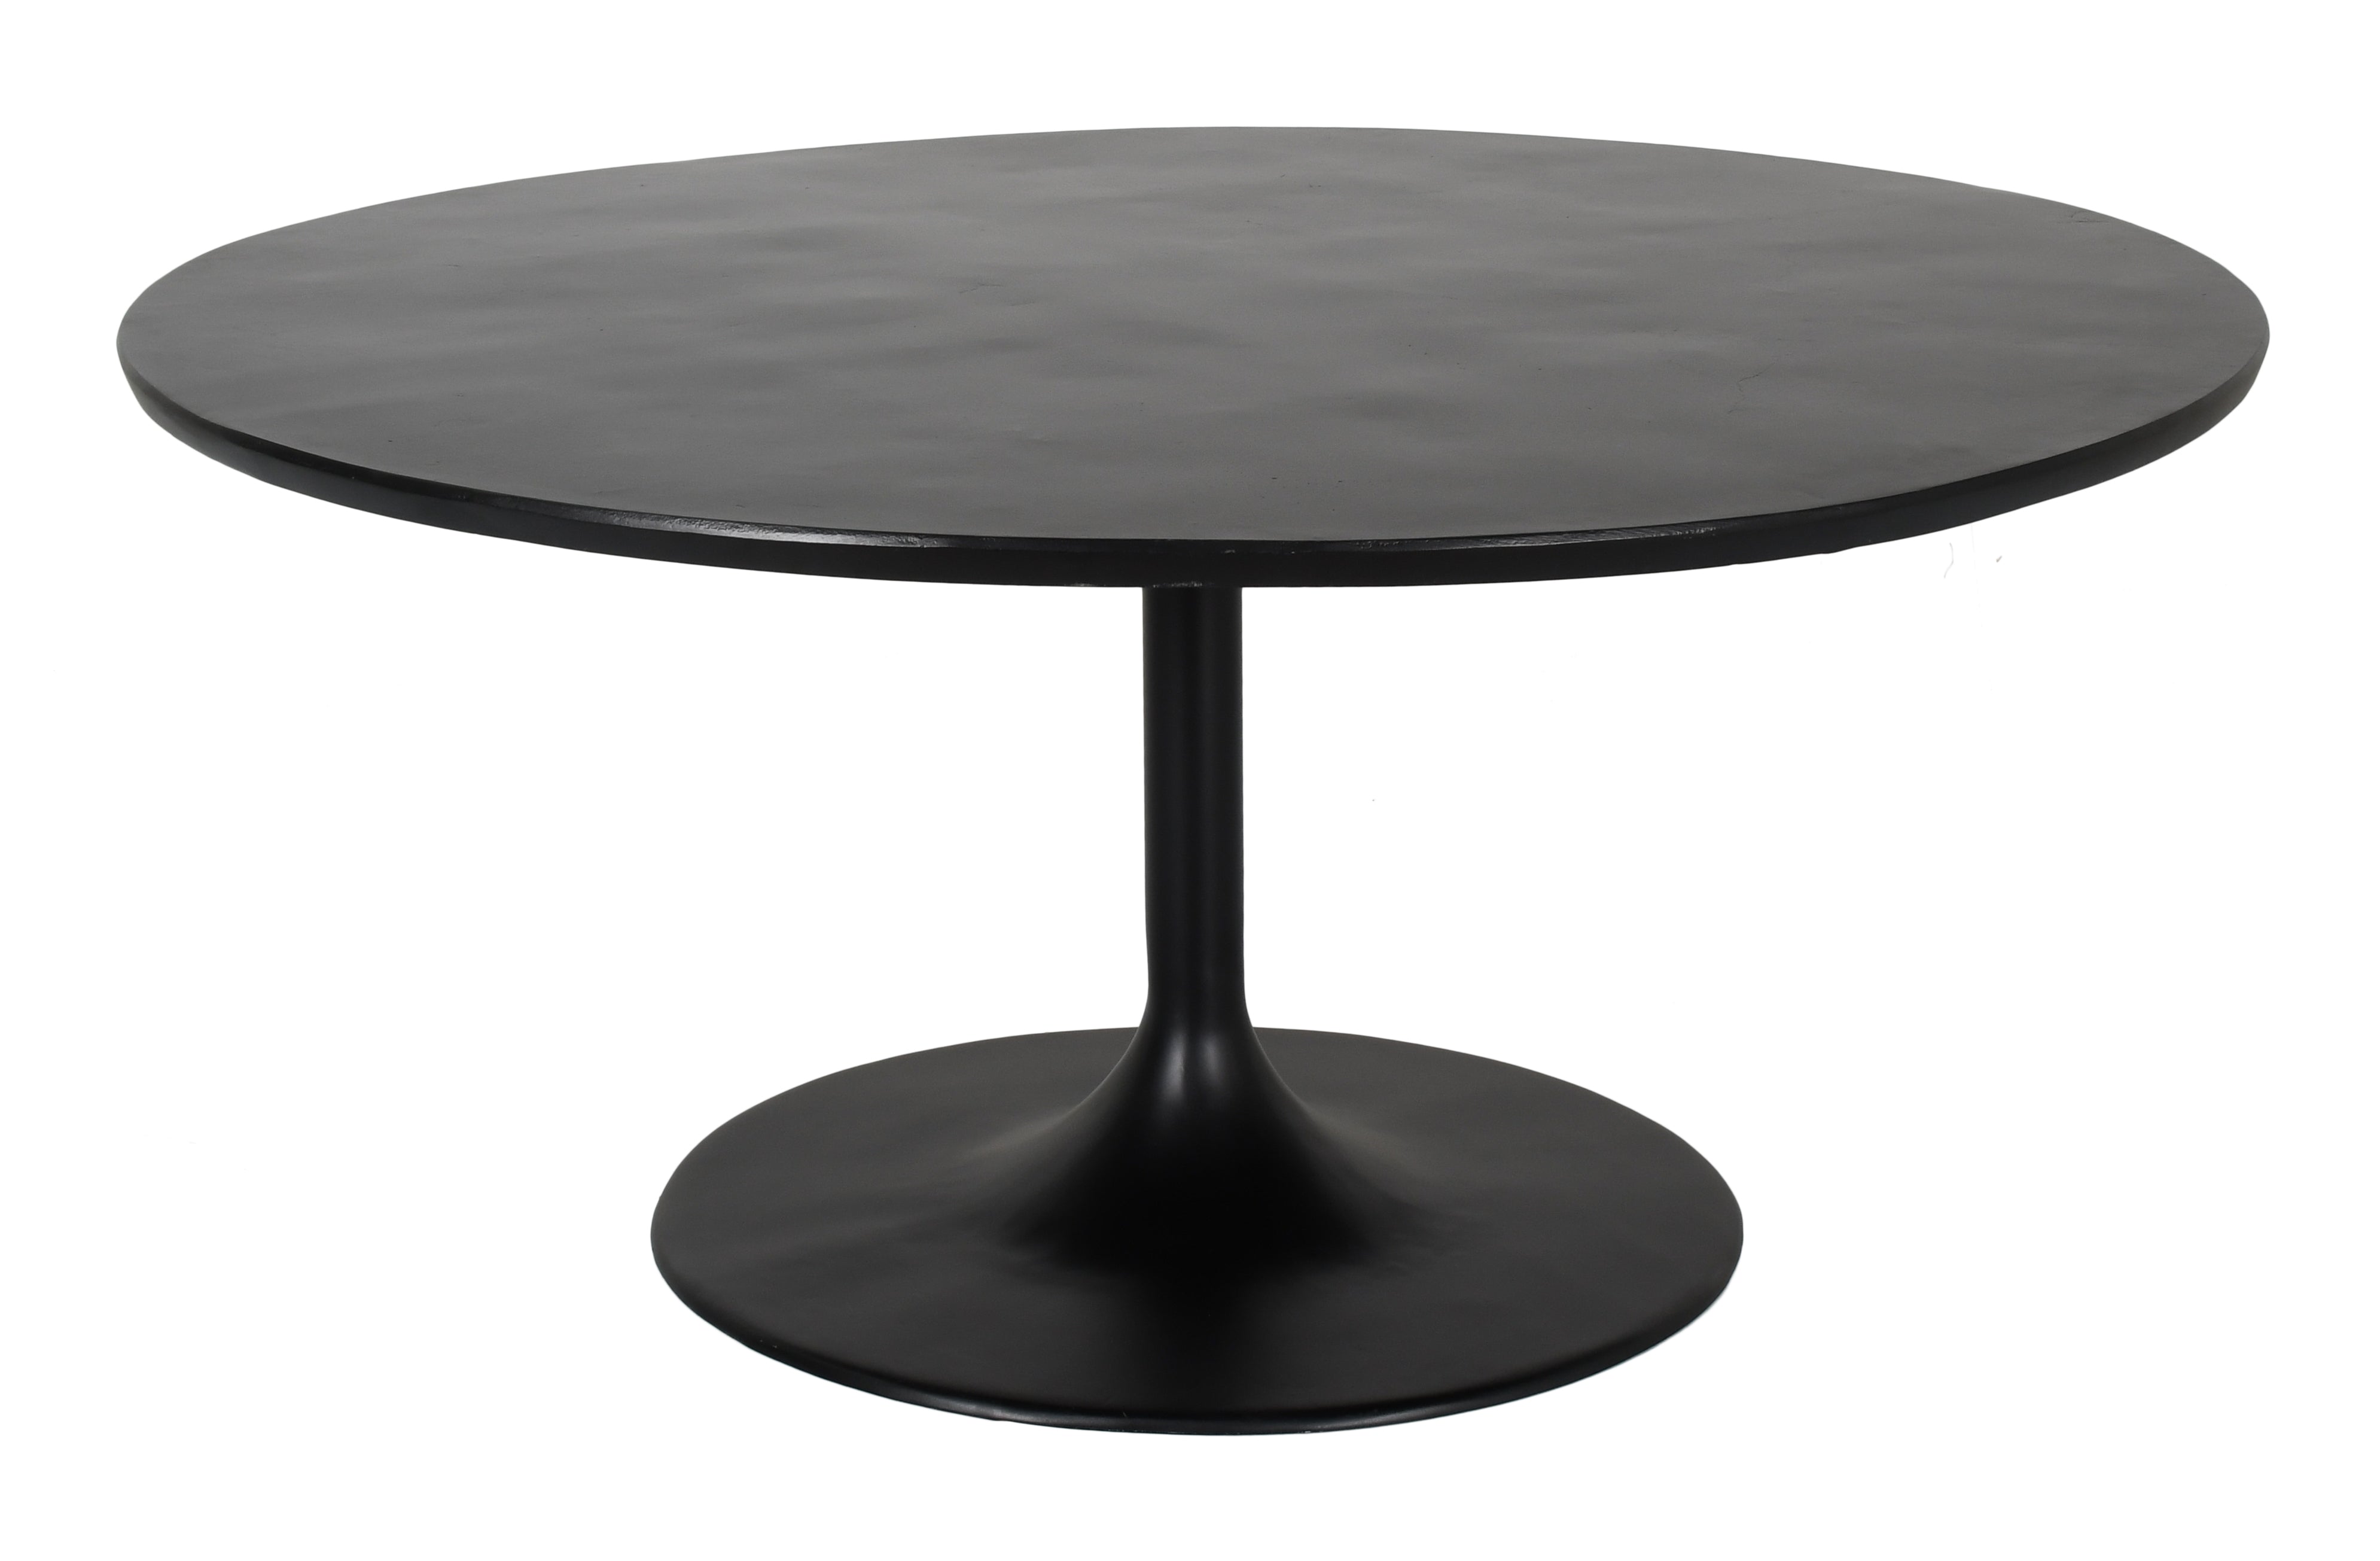 Tulip 60" Round Dining Table By Castelle